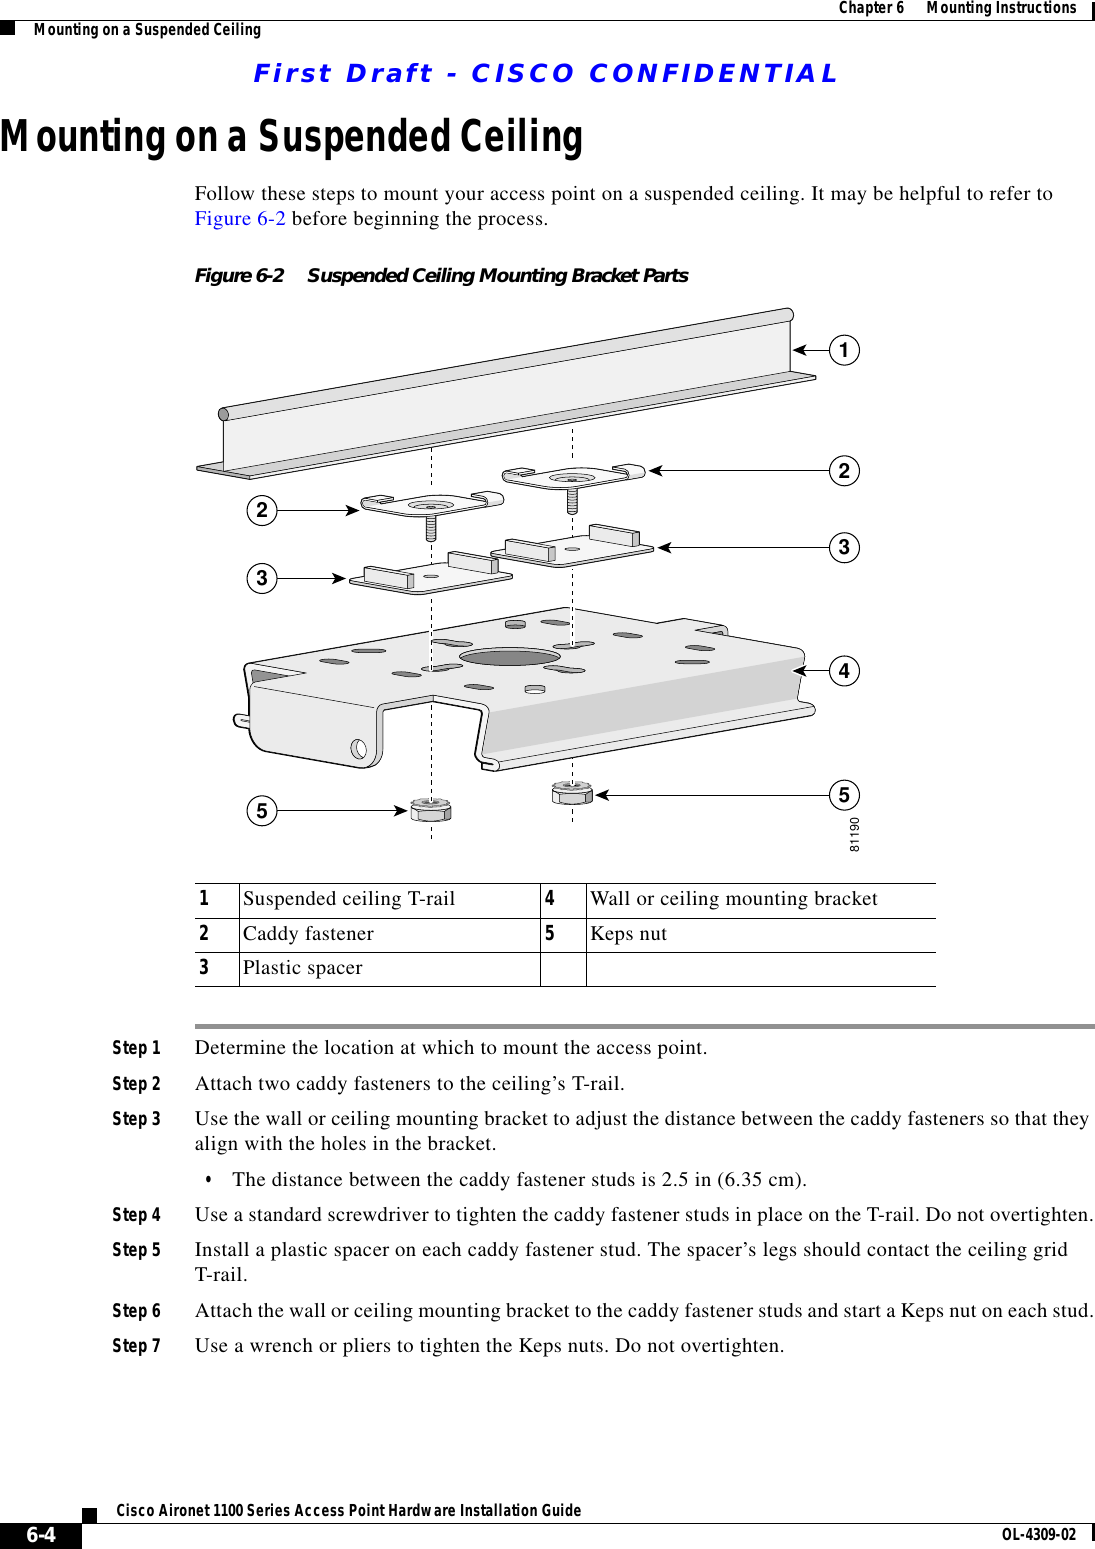 First Draft - CISCO CONFIDENTIAL6-4Cisco Aironet 1100 Series Access Point Hardware Installation Guide OL-4309-02Chapter 6      Mounting InstructionsMounting on a Suspended CeilingMounting on a Suspended CeilingFollow these steps to mount your access point on a suspended ceiling. It may be helpful to refer to Figure 6-2 before beginning the process.Figure 6-2 Suspended Ceiling Mounting Bracket PartsStep 1 Determine the location at which to mount the access point.Step 2 Attach two caddy fasteners to the ceiling’s T-rail.Step 3 Use the wall or ceiling mounting bracket to adjust the distance between the caddy fasteners so that they align with the holes in the bracket.•The distance between the caddy fastener studs is 2.5 in (6.35 cm).Step 4 Use a standard screwdriver to tighten the caddy fastener studs in place on the T-rail. Do not overtighten.Step 5 Install a plastic spacer on each caddy fastener stud. The spacer’s legs should contact the ceiling grid T-rail.Step 6 Attach the wall or ceiling mounting bracket to the caddy fastener studs and start a Keps nut on each stud.Step 7 Use a wrench or pliers to tighten the Keps nuts. Do not overtighten.1Suspended ceiling T-rail 4Wall or ceiling mounting bracket2Caddy fastener 5Keps nut3Plastic spacer1223534581190